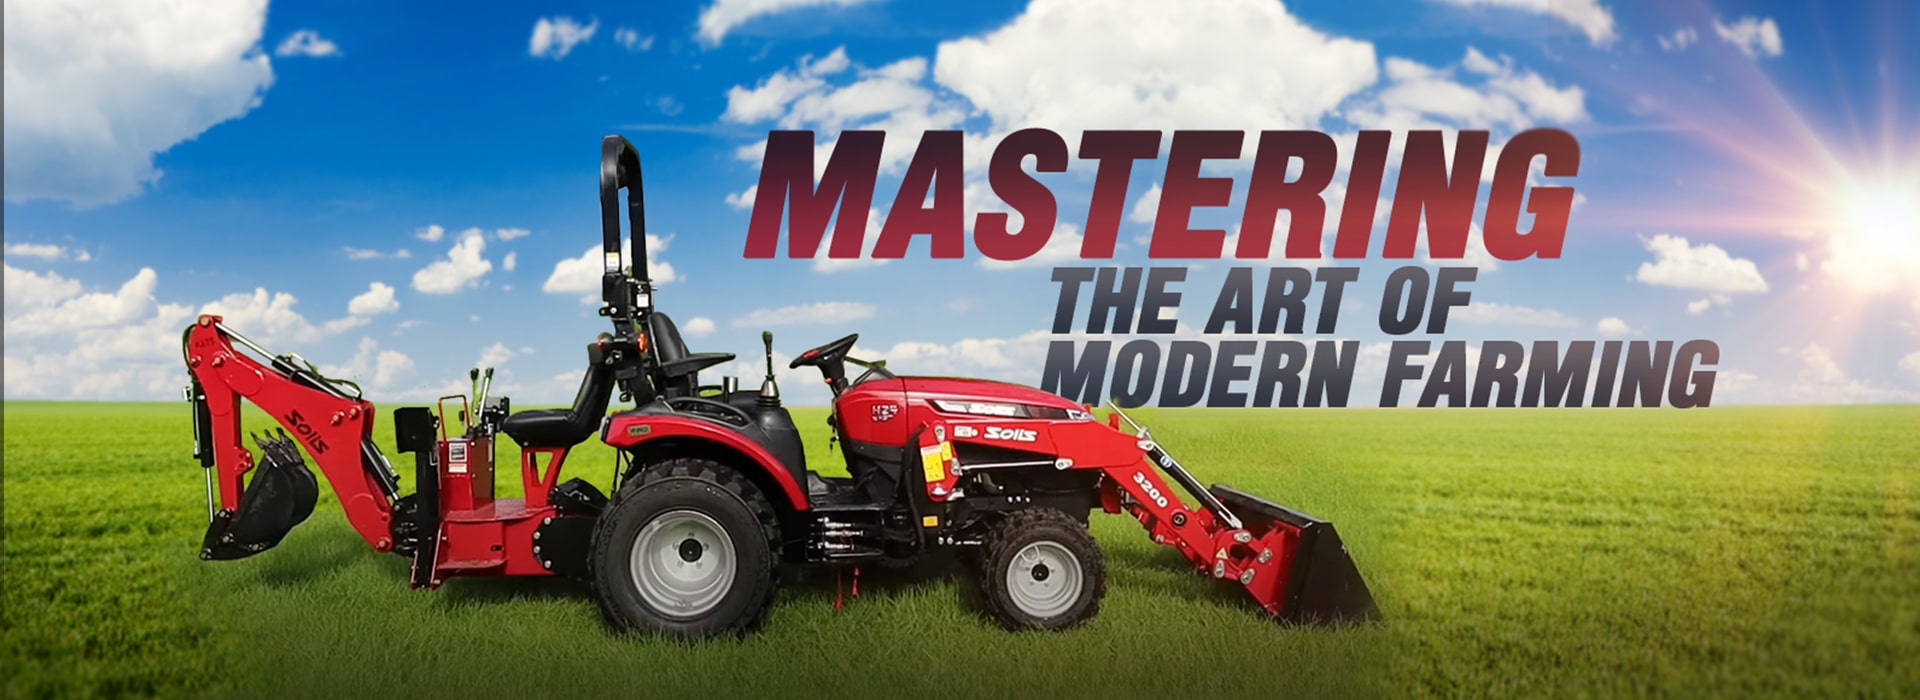 Mastering the Art of Modern Farming: Why Solis Tractors are Every Farmer’s Dream EXPLAINED